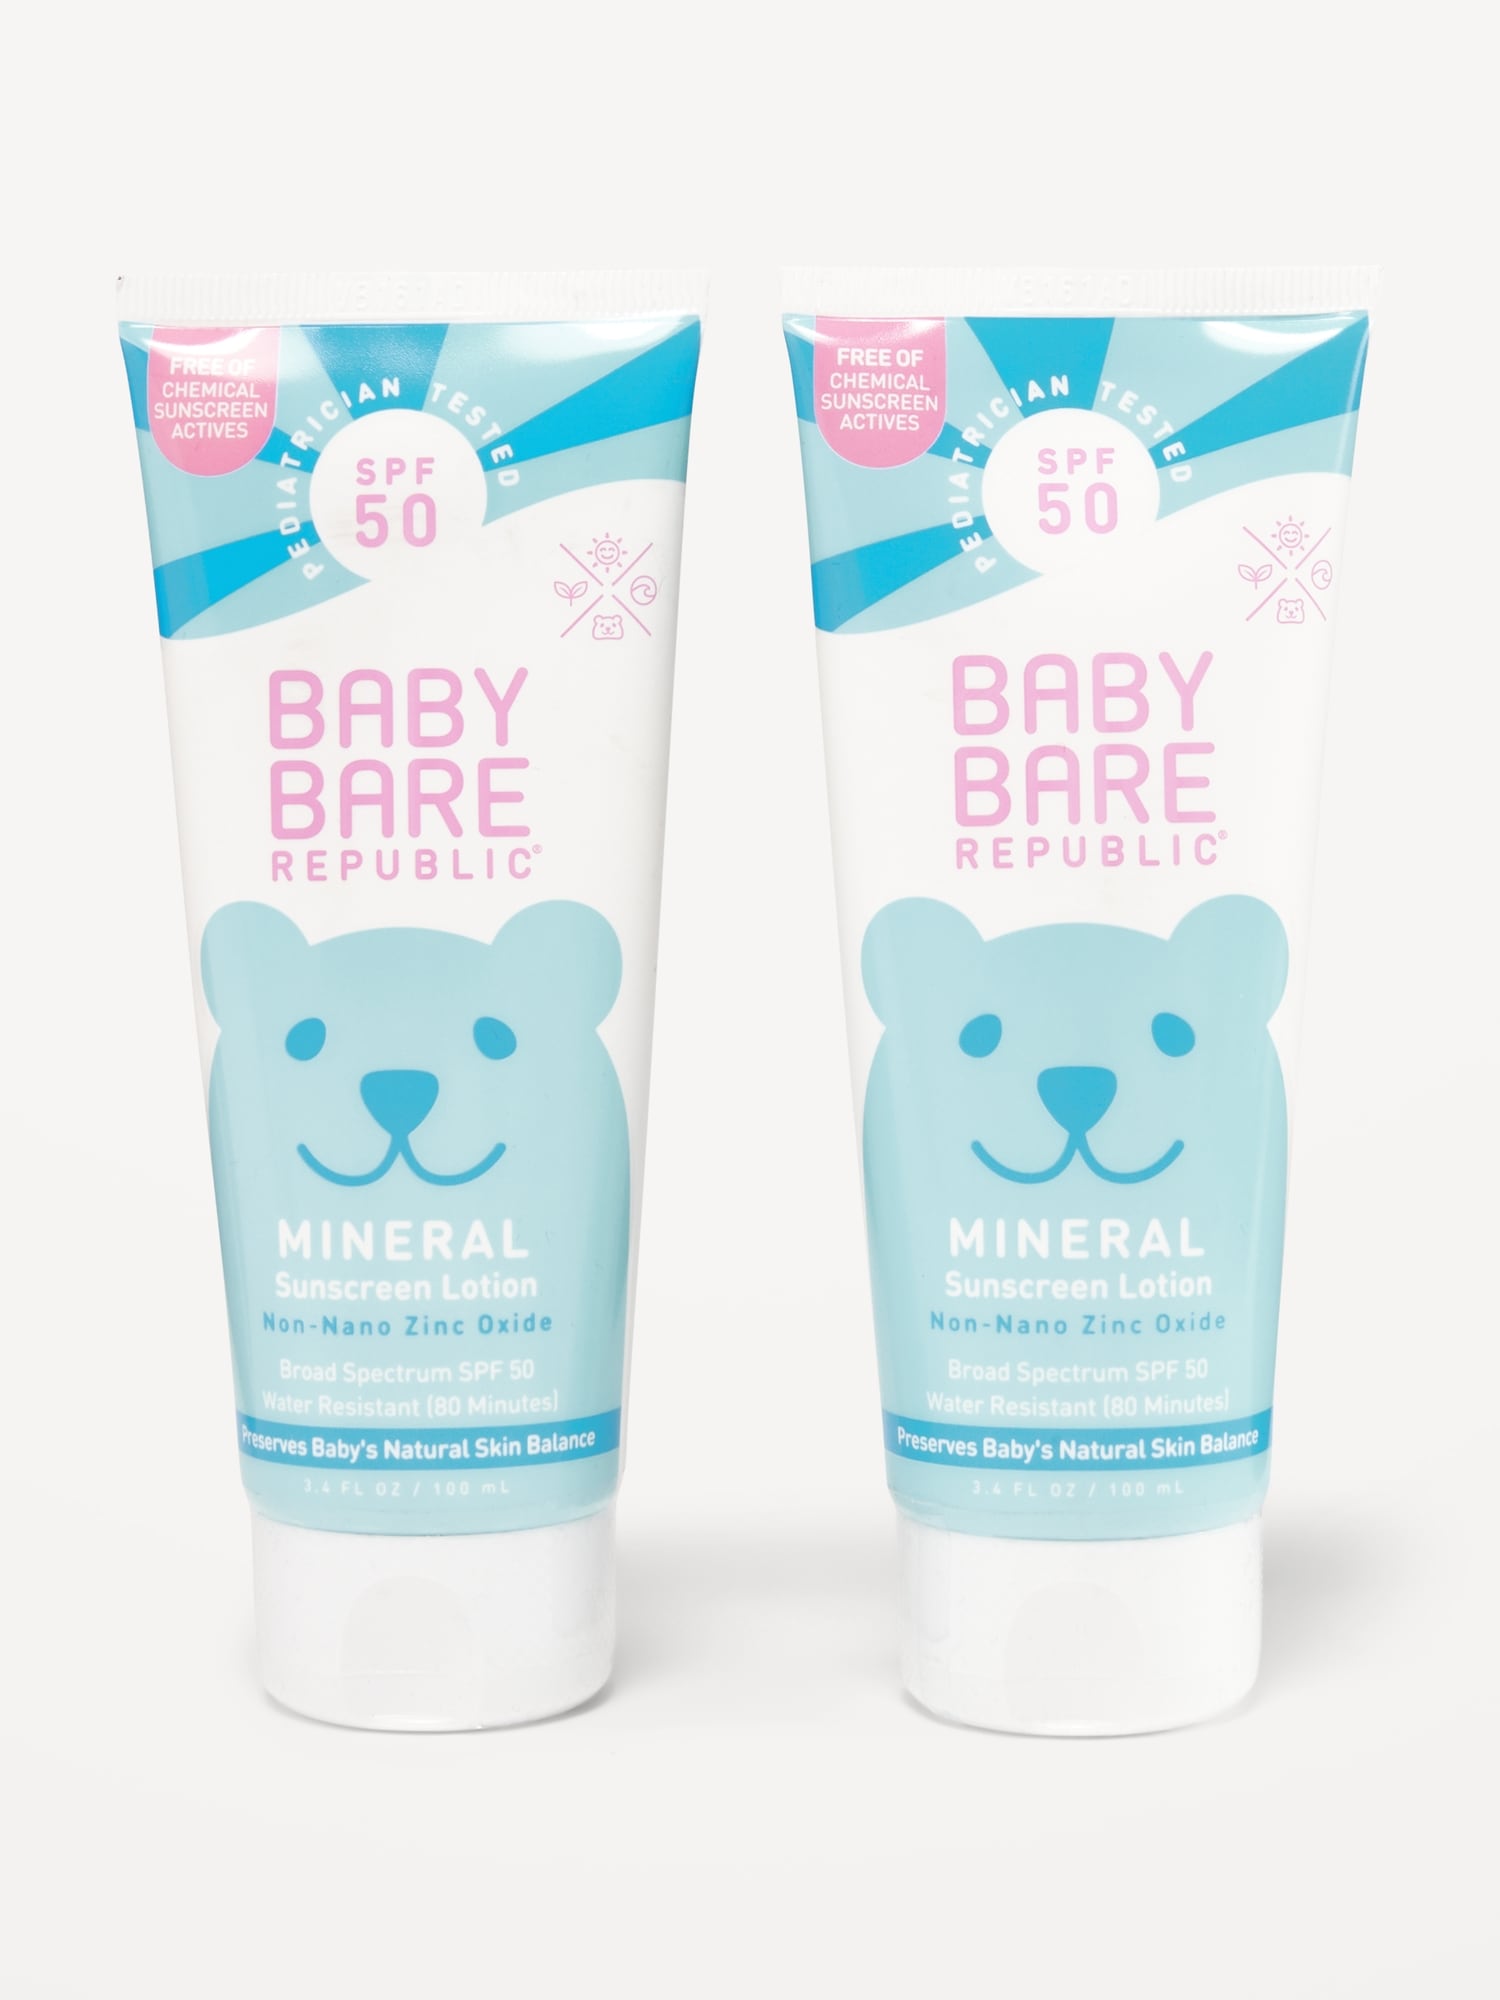 Old Navy Bare Republic® SPF 50 Baby Sunscreen Face & Body Lotion 2-Pack clear. 1